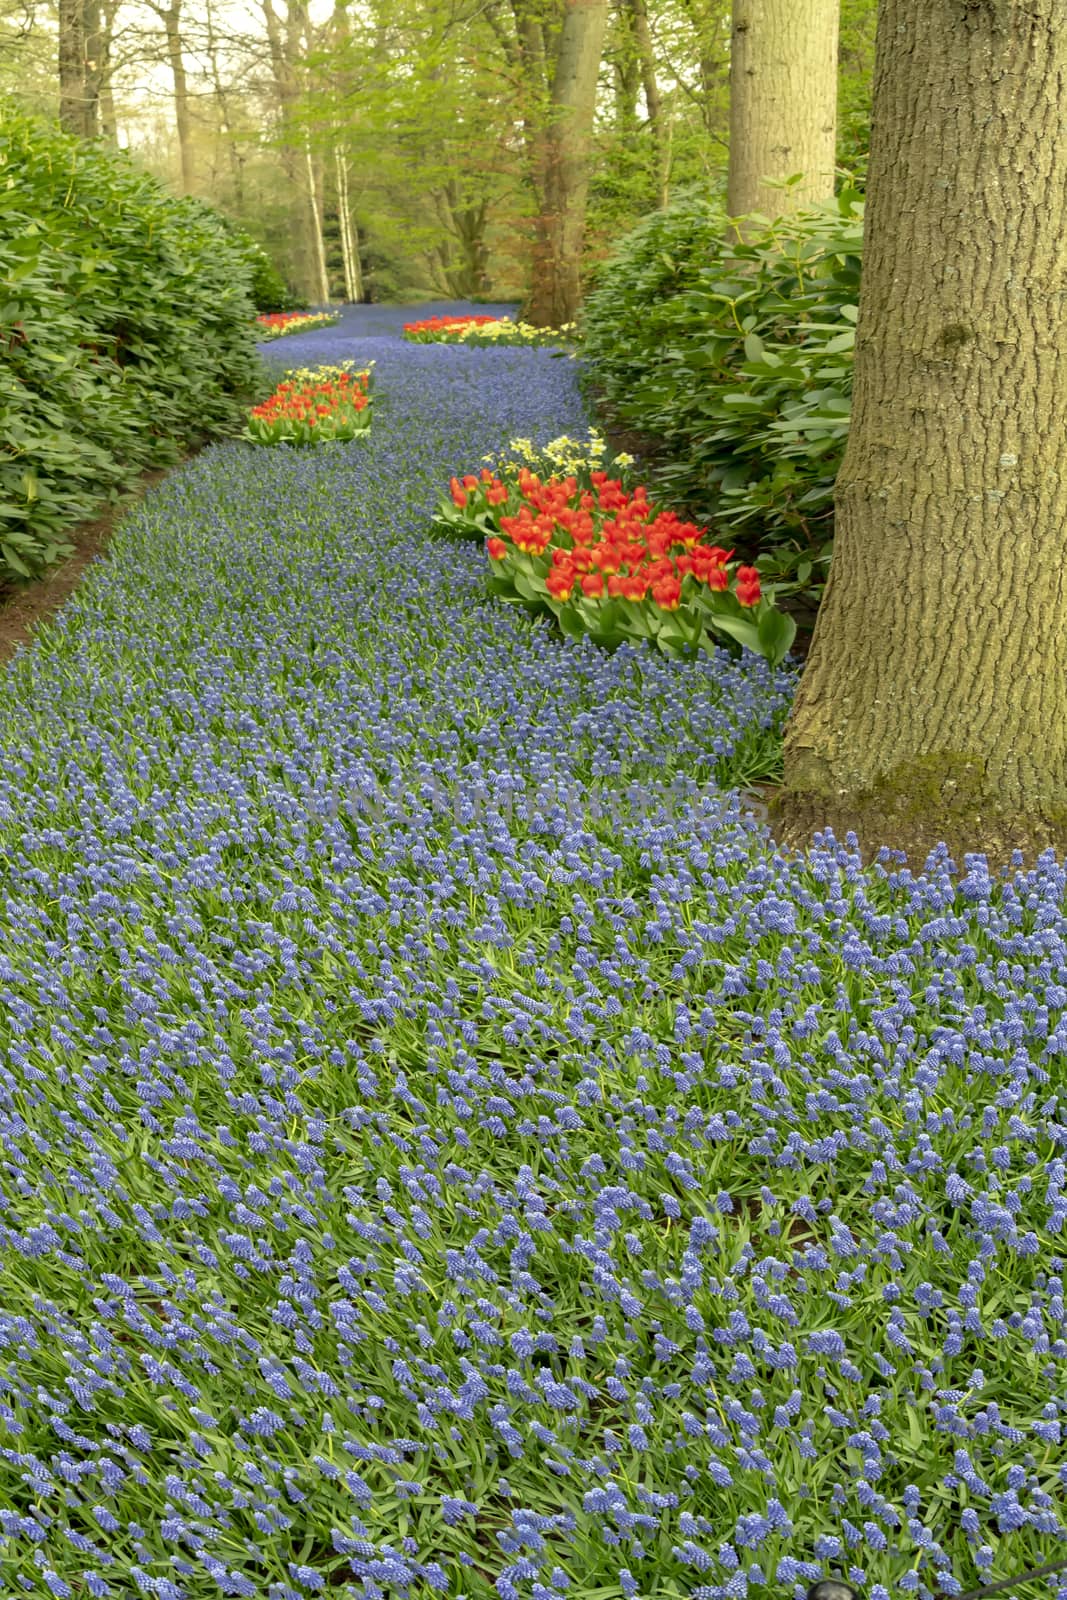 Blues flowers growing around trees and green grass in a well maintained spring garden in Netherlands